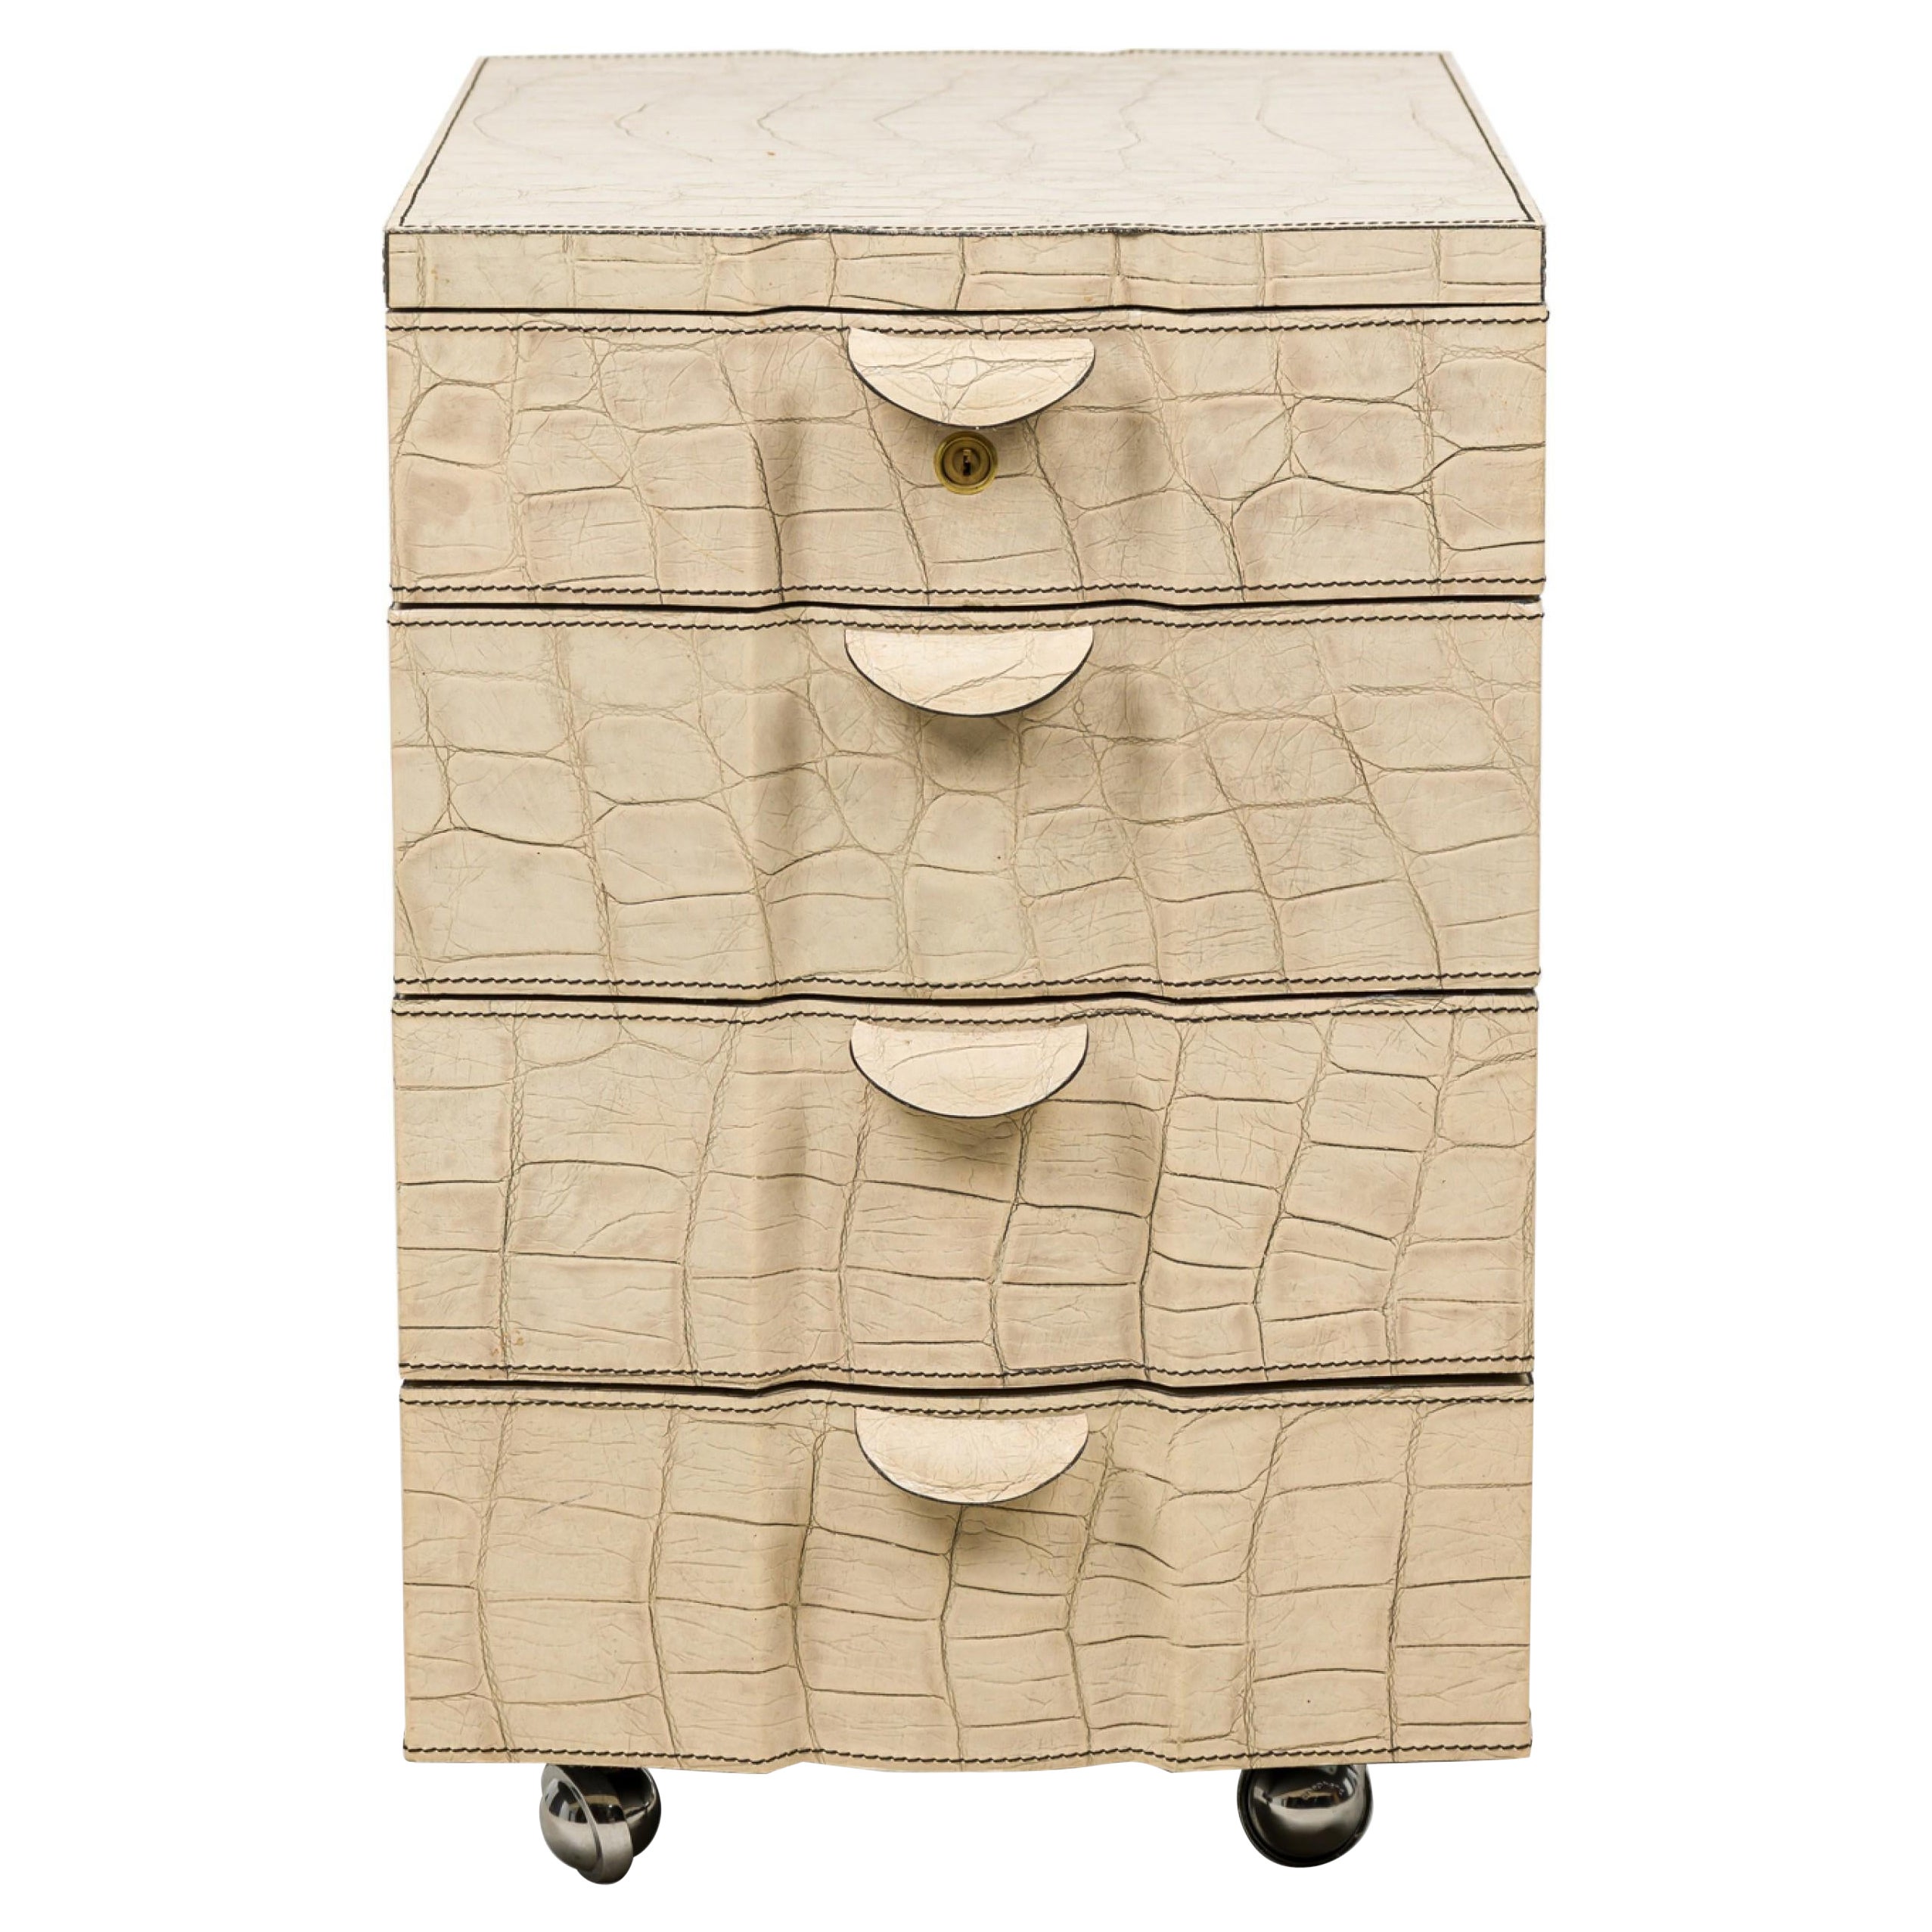 Needlework Commodes and Chests of Drawers